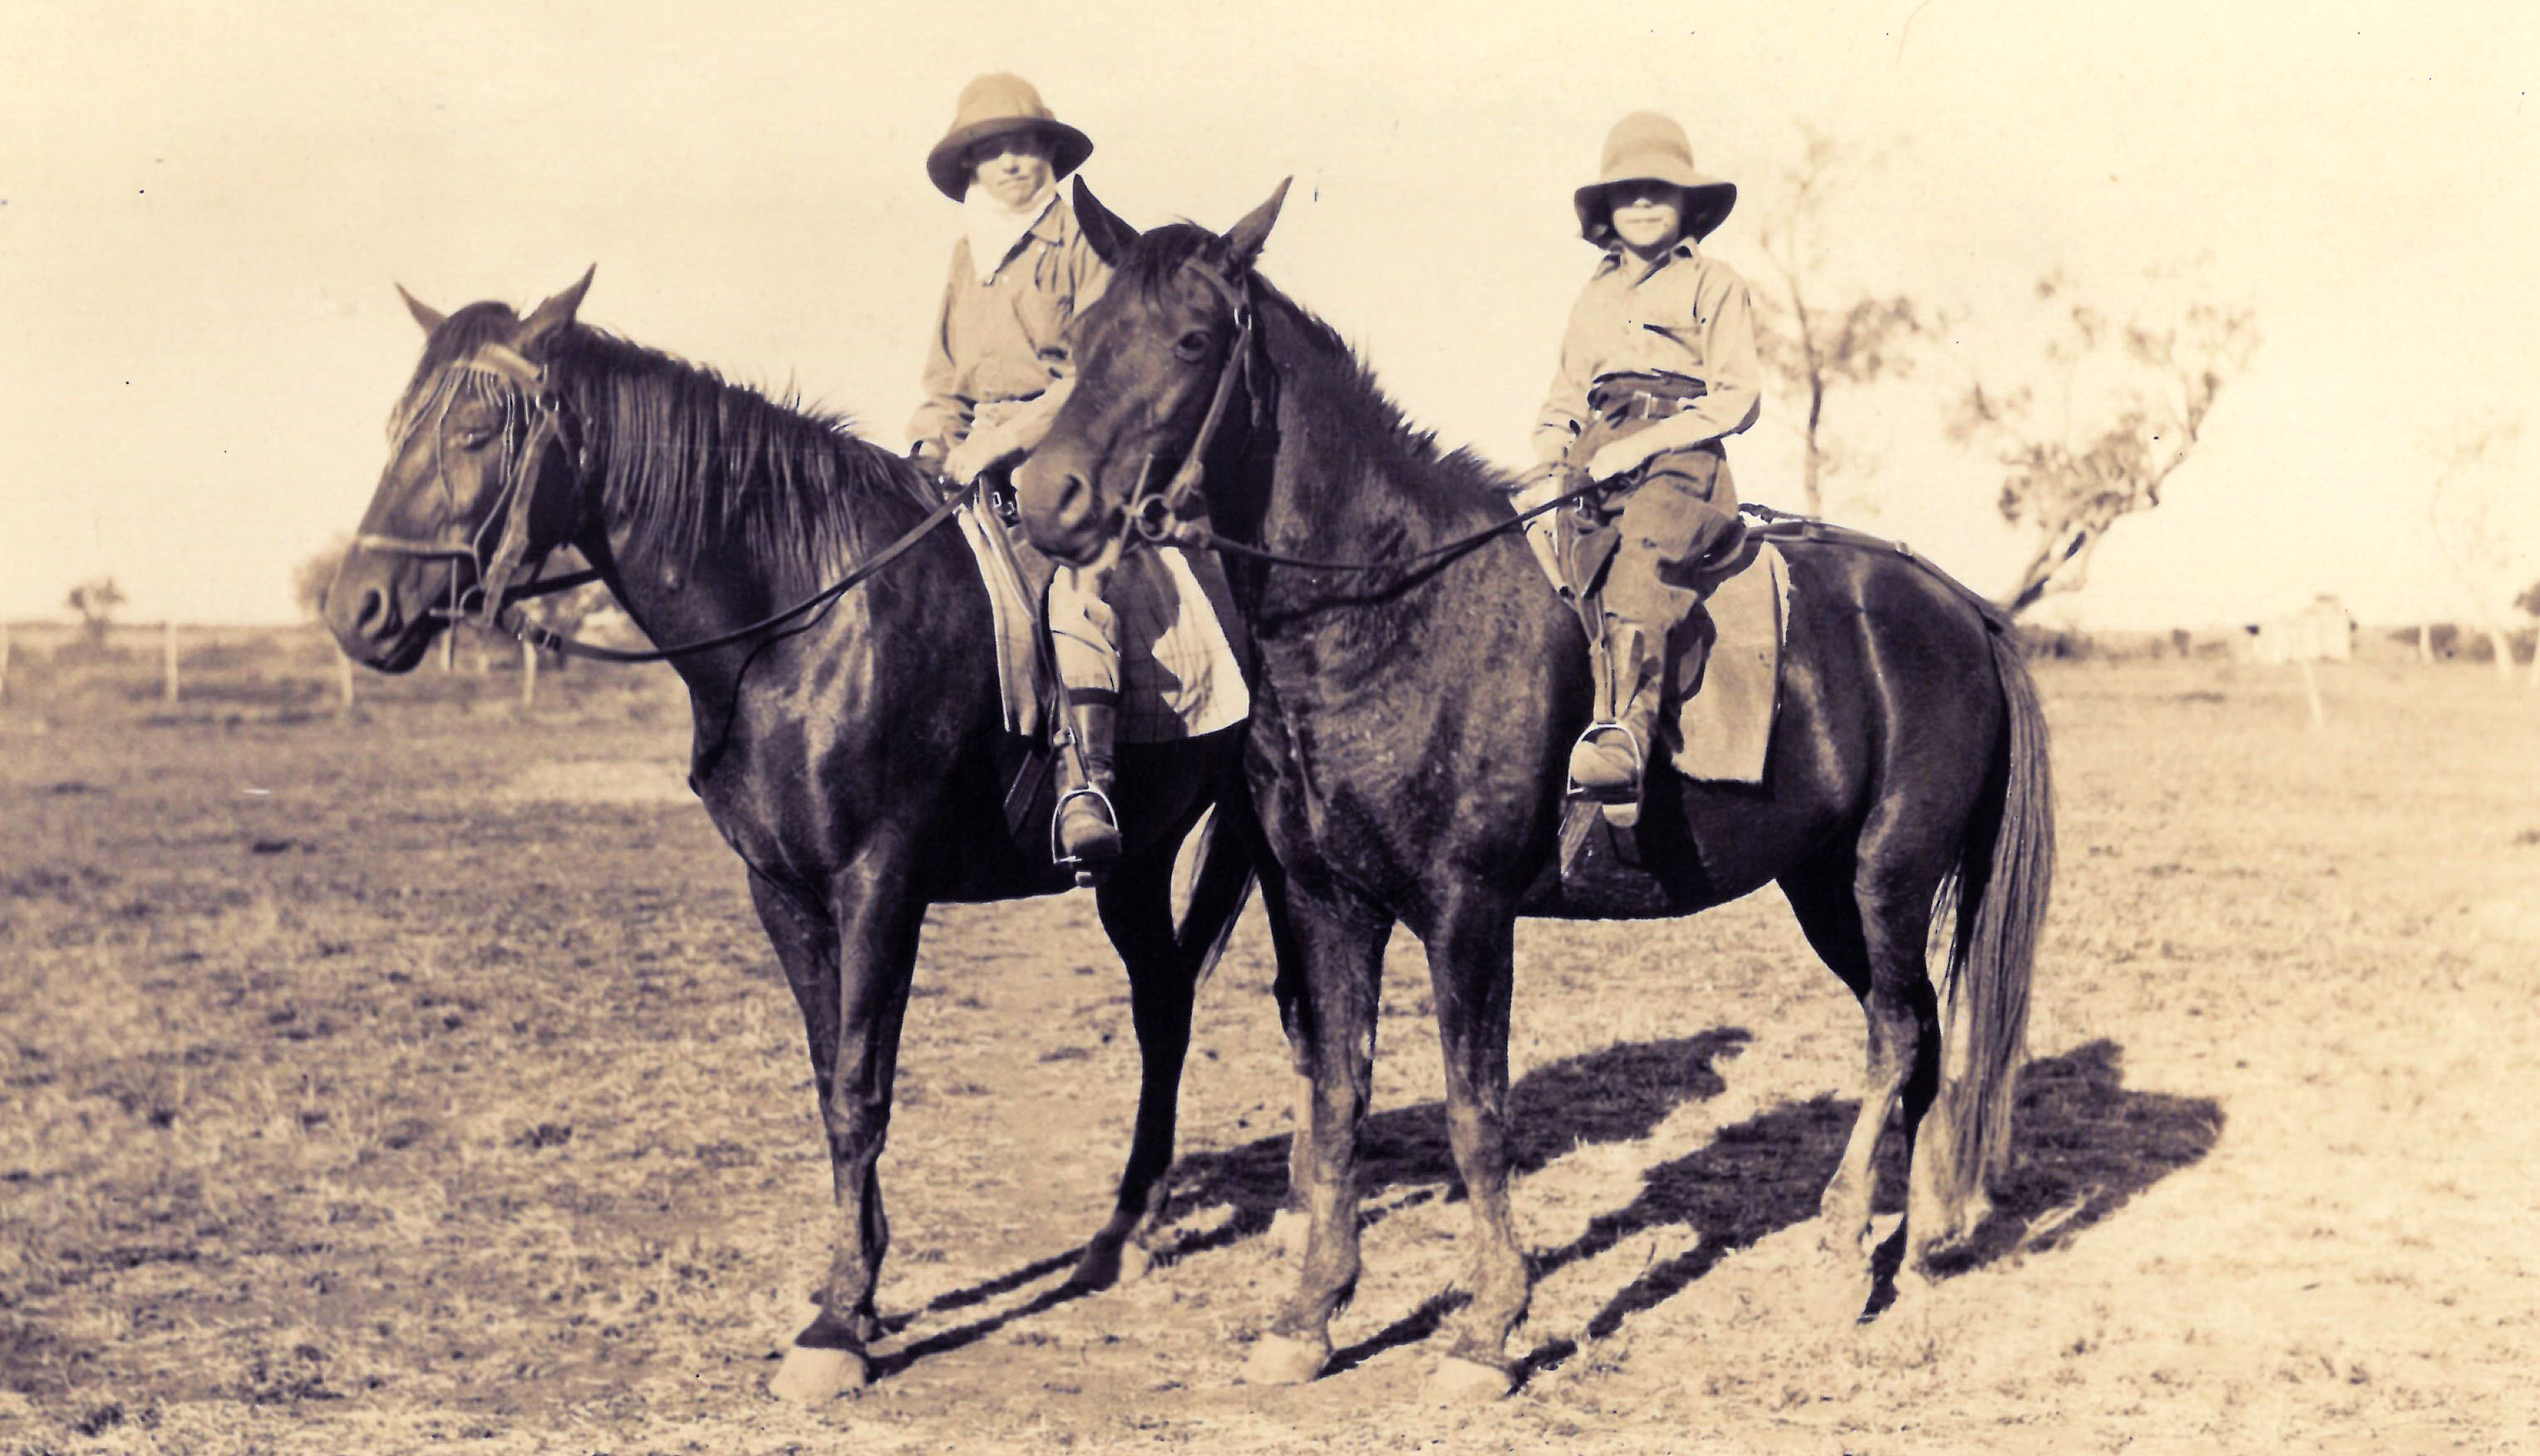 Edie and Dell Farley riding horses at Dalgonally Station, Queensland, 1924 (N172-17). 